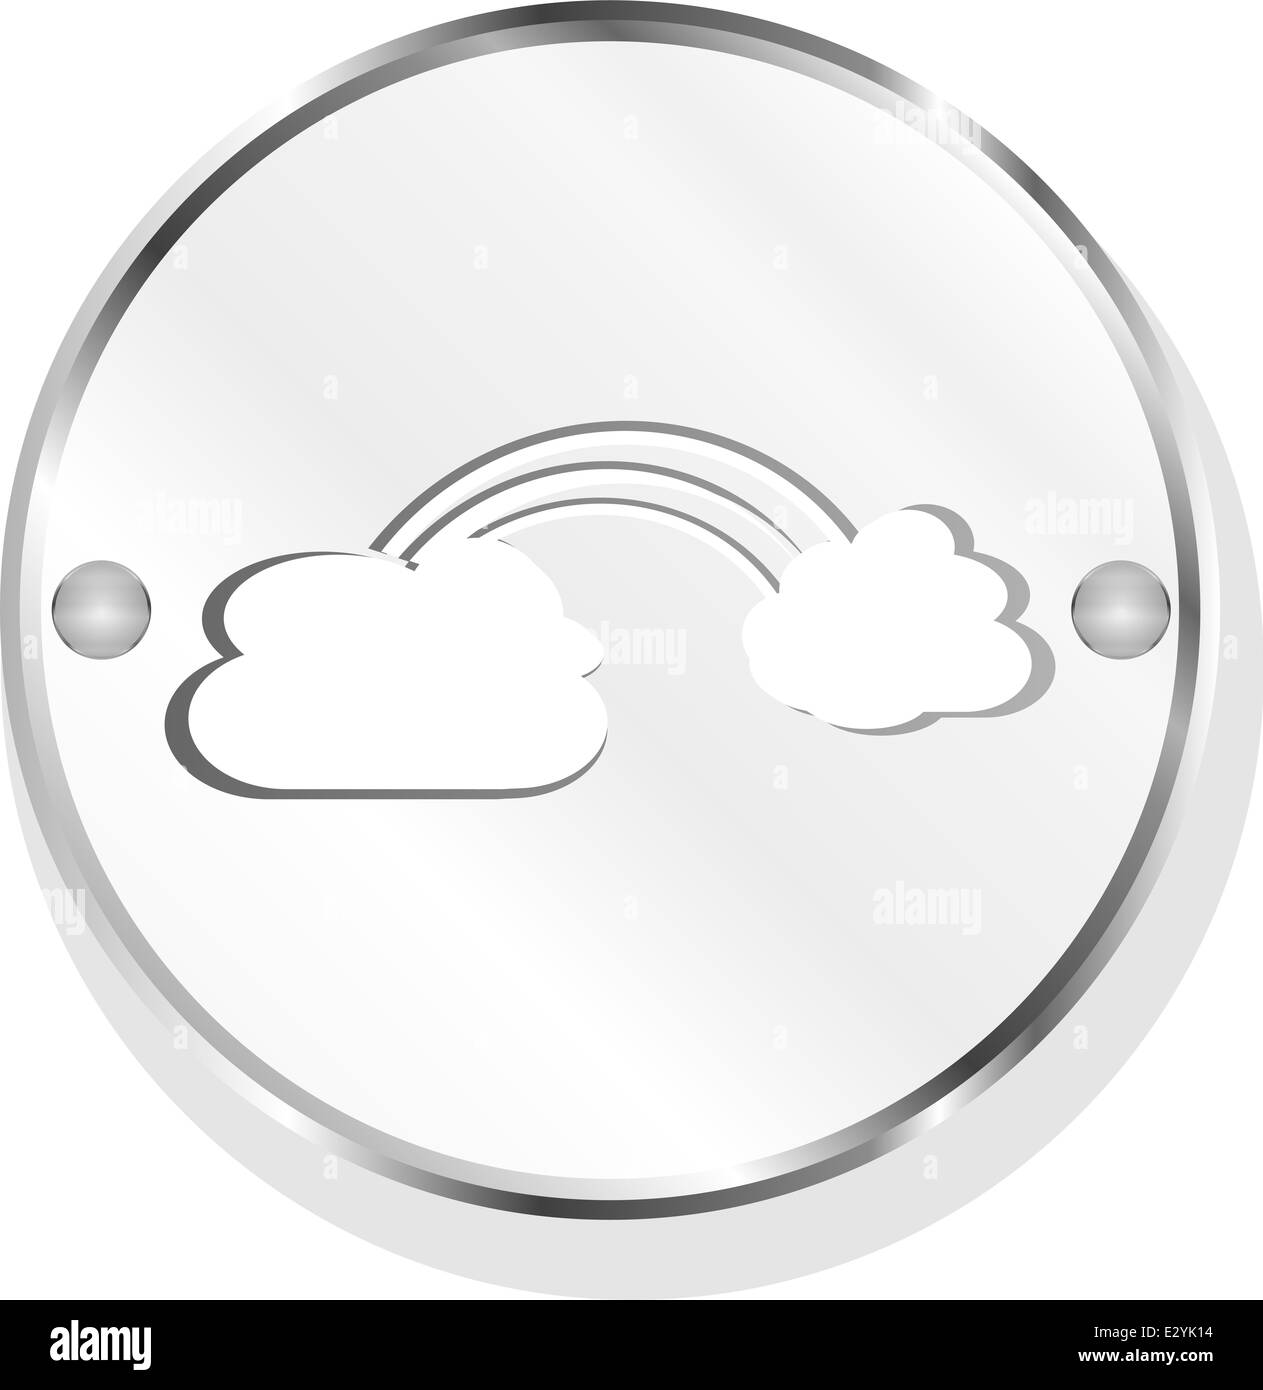 Abstract cloud web icon isolated on white Stock Photo